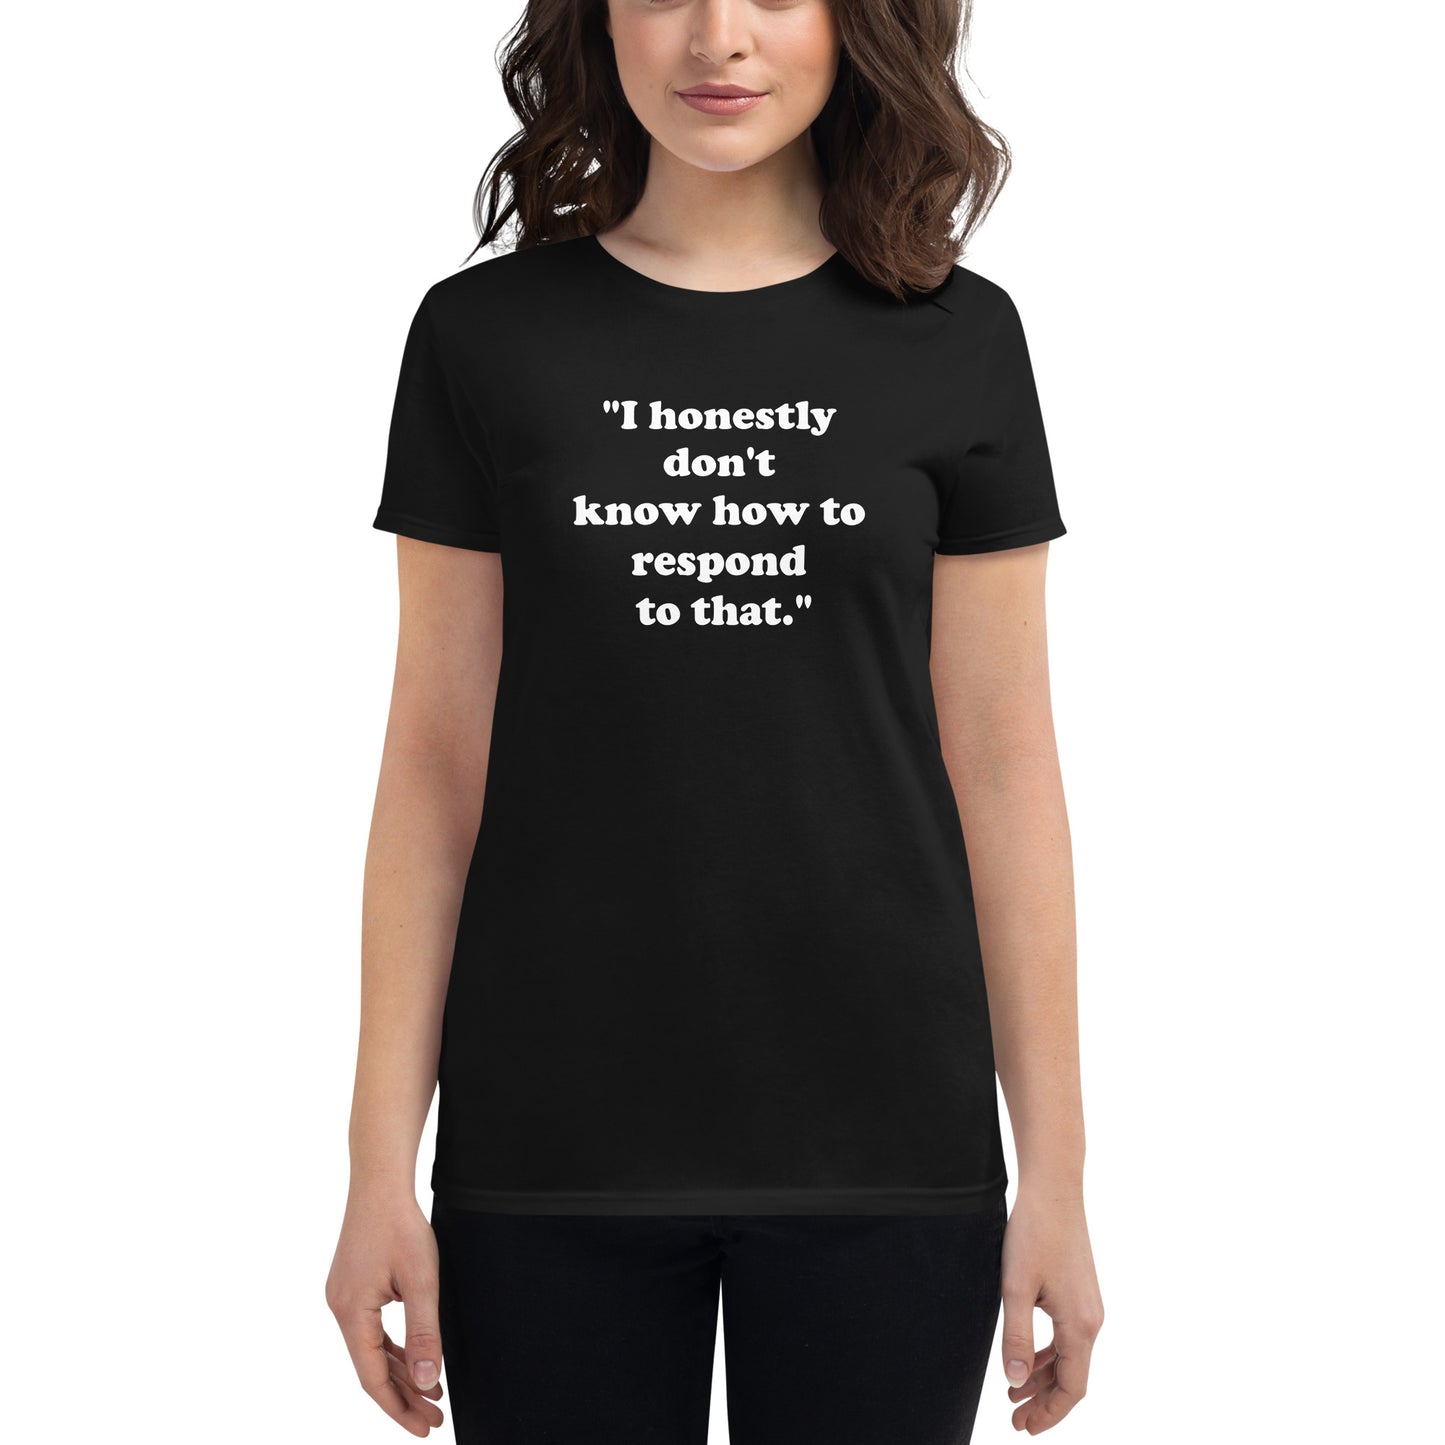 "I honestly don't know how to respond to that." women's t-shirt